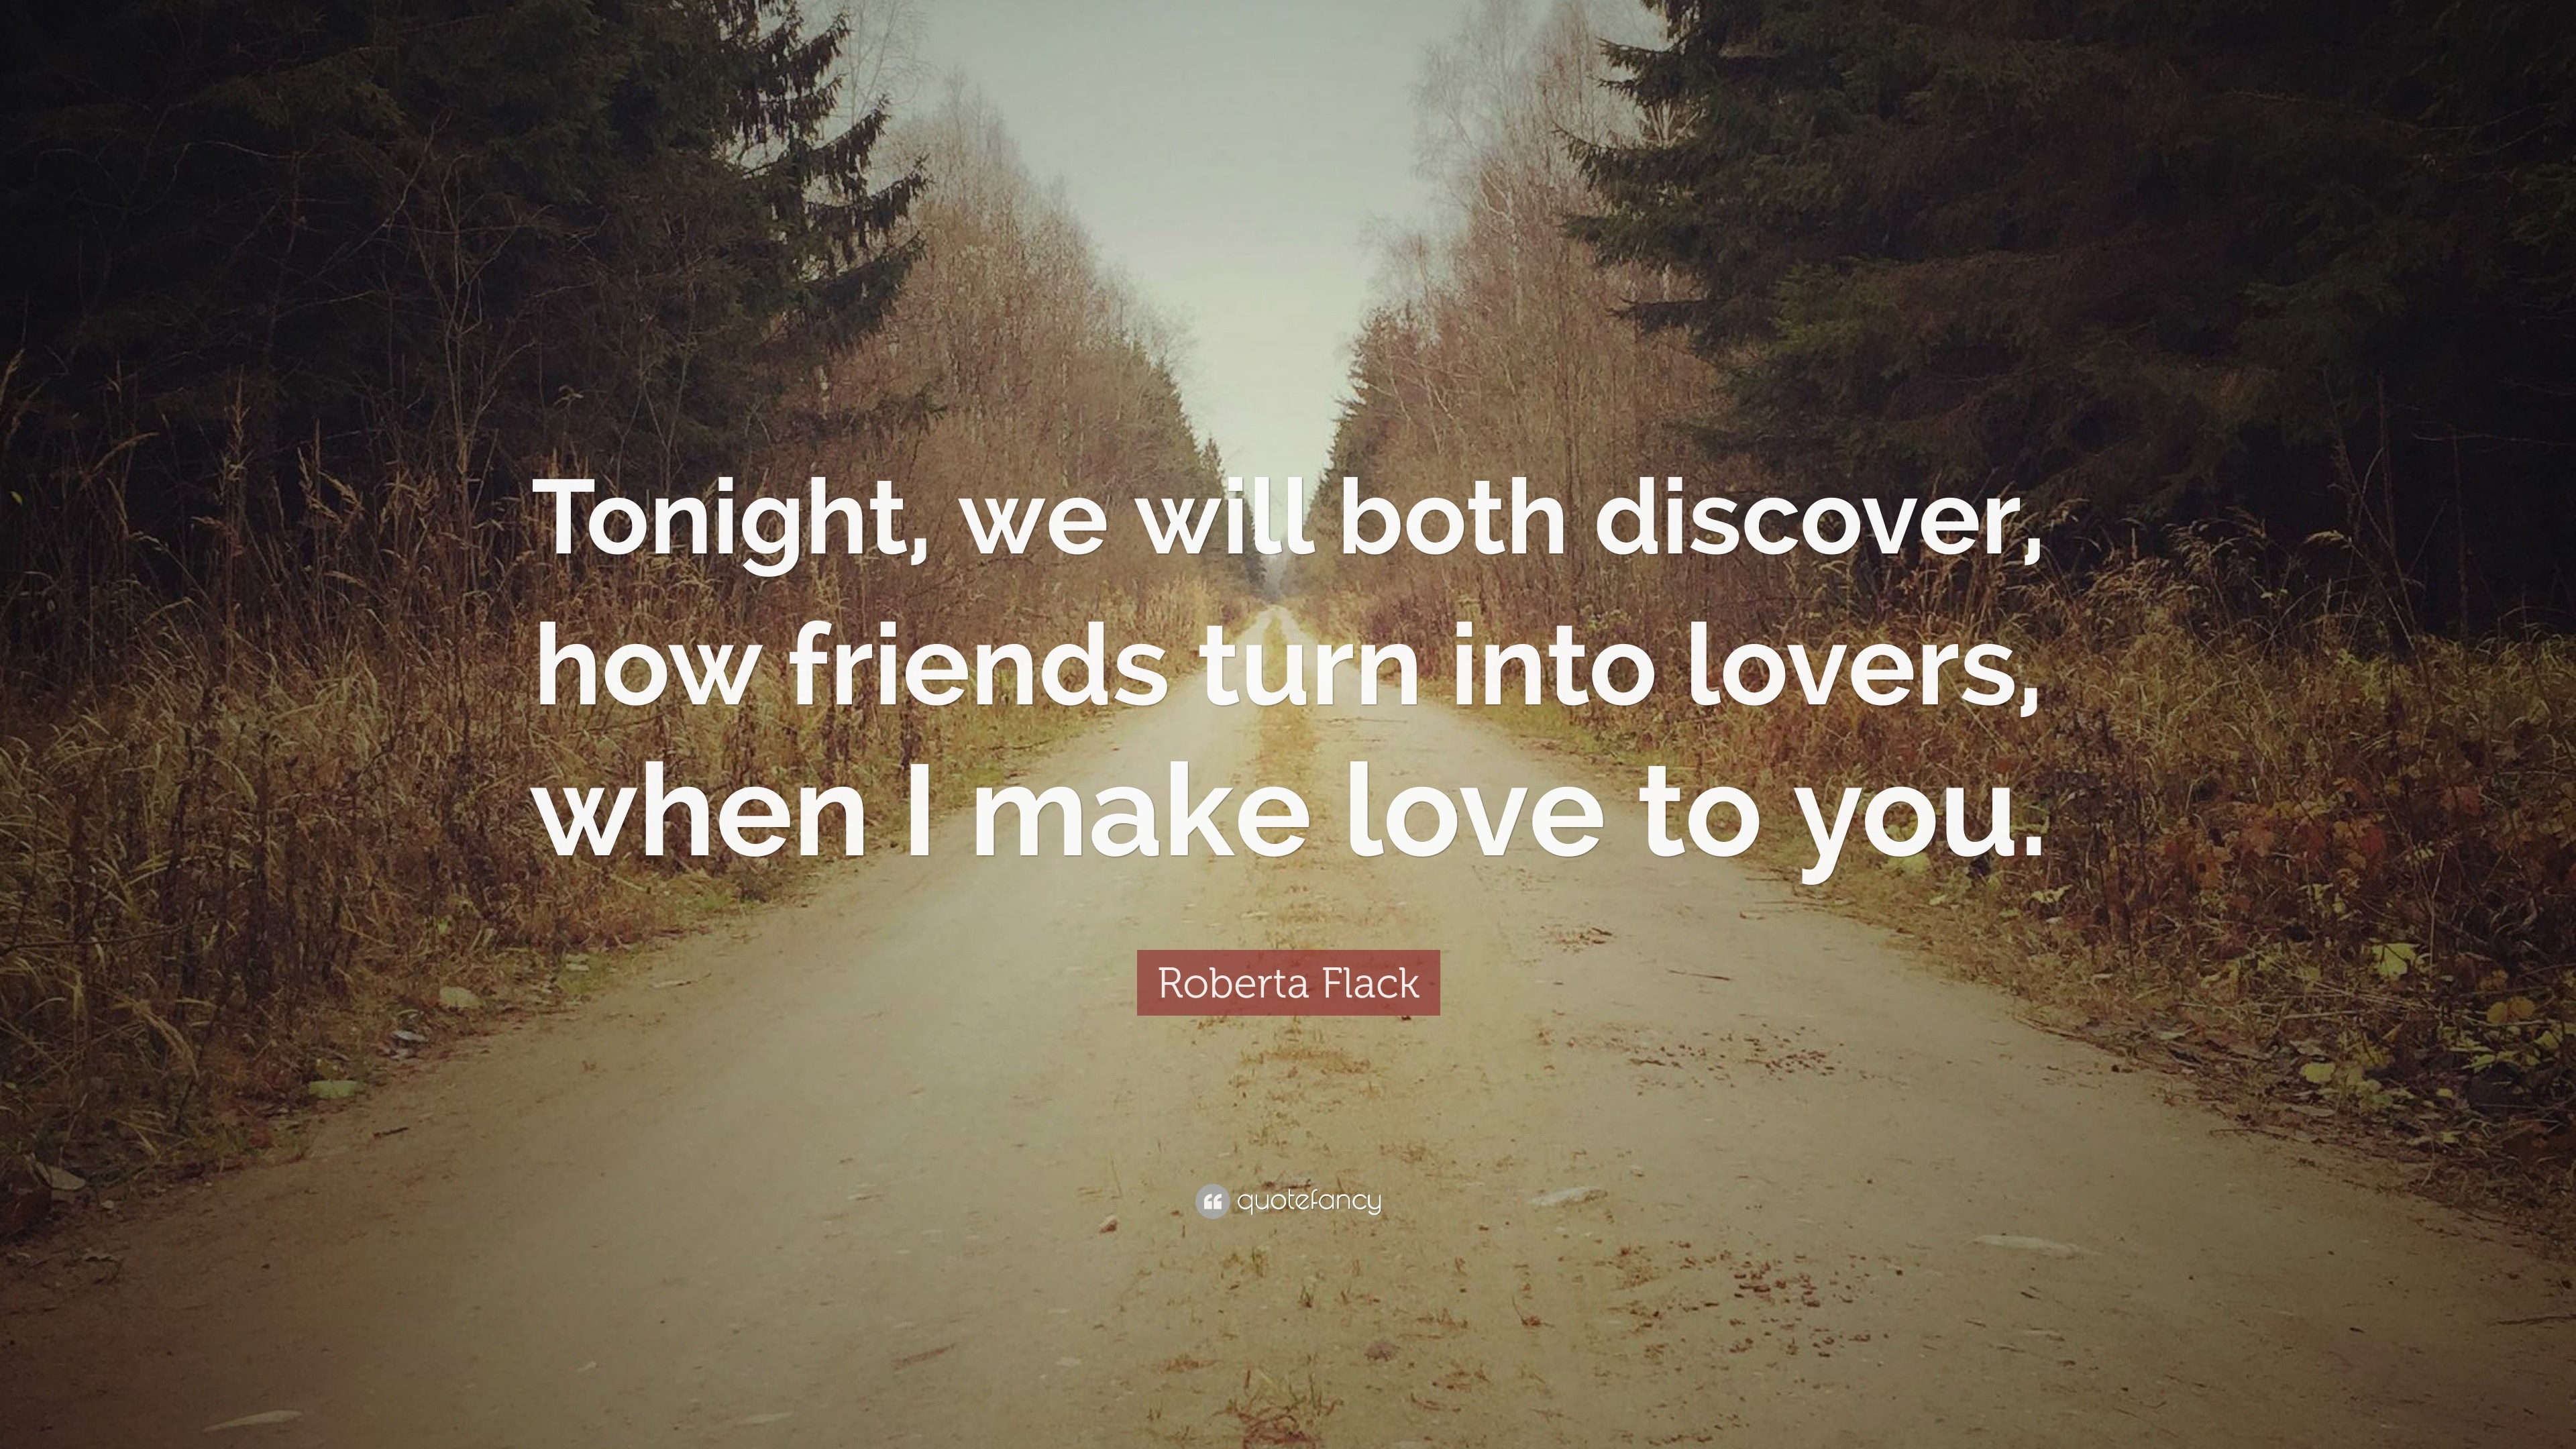 Roberta Flack Quote: “Tonight, we will both discover, how friends turn